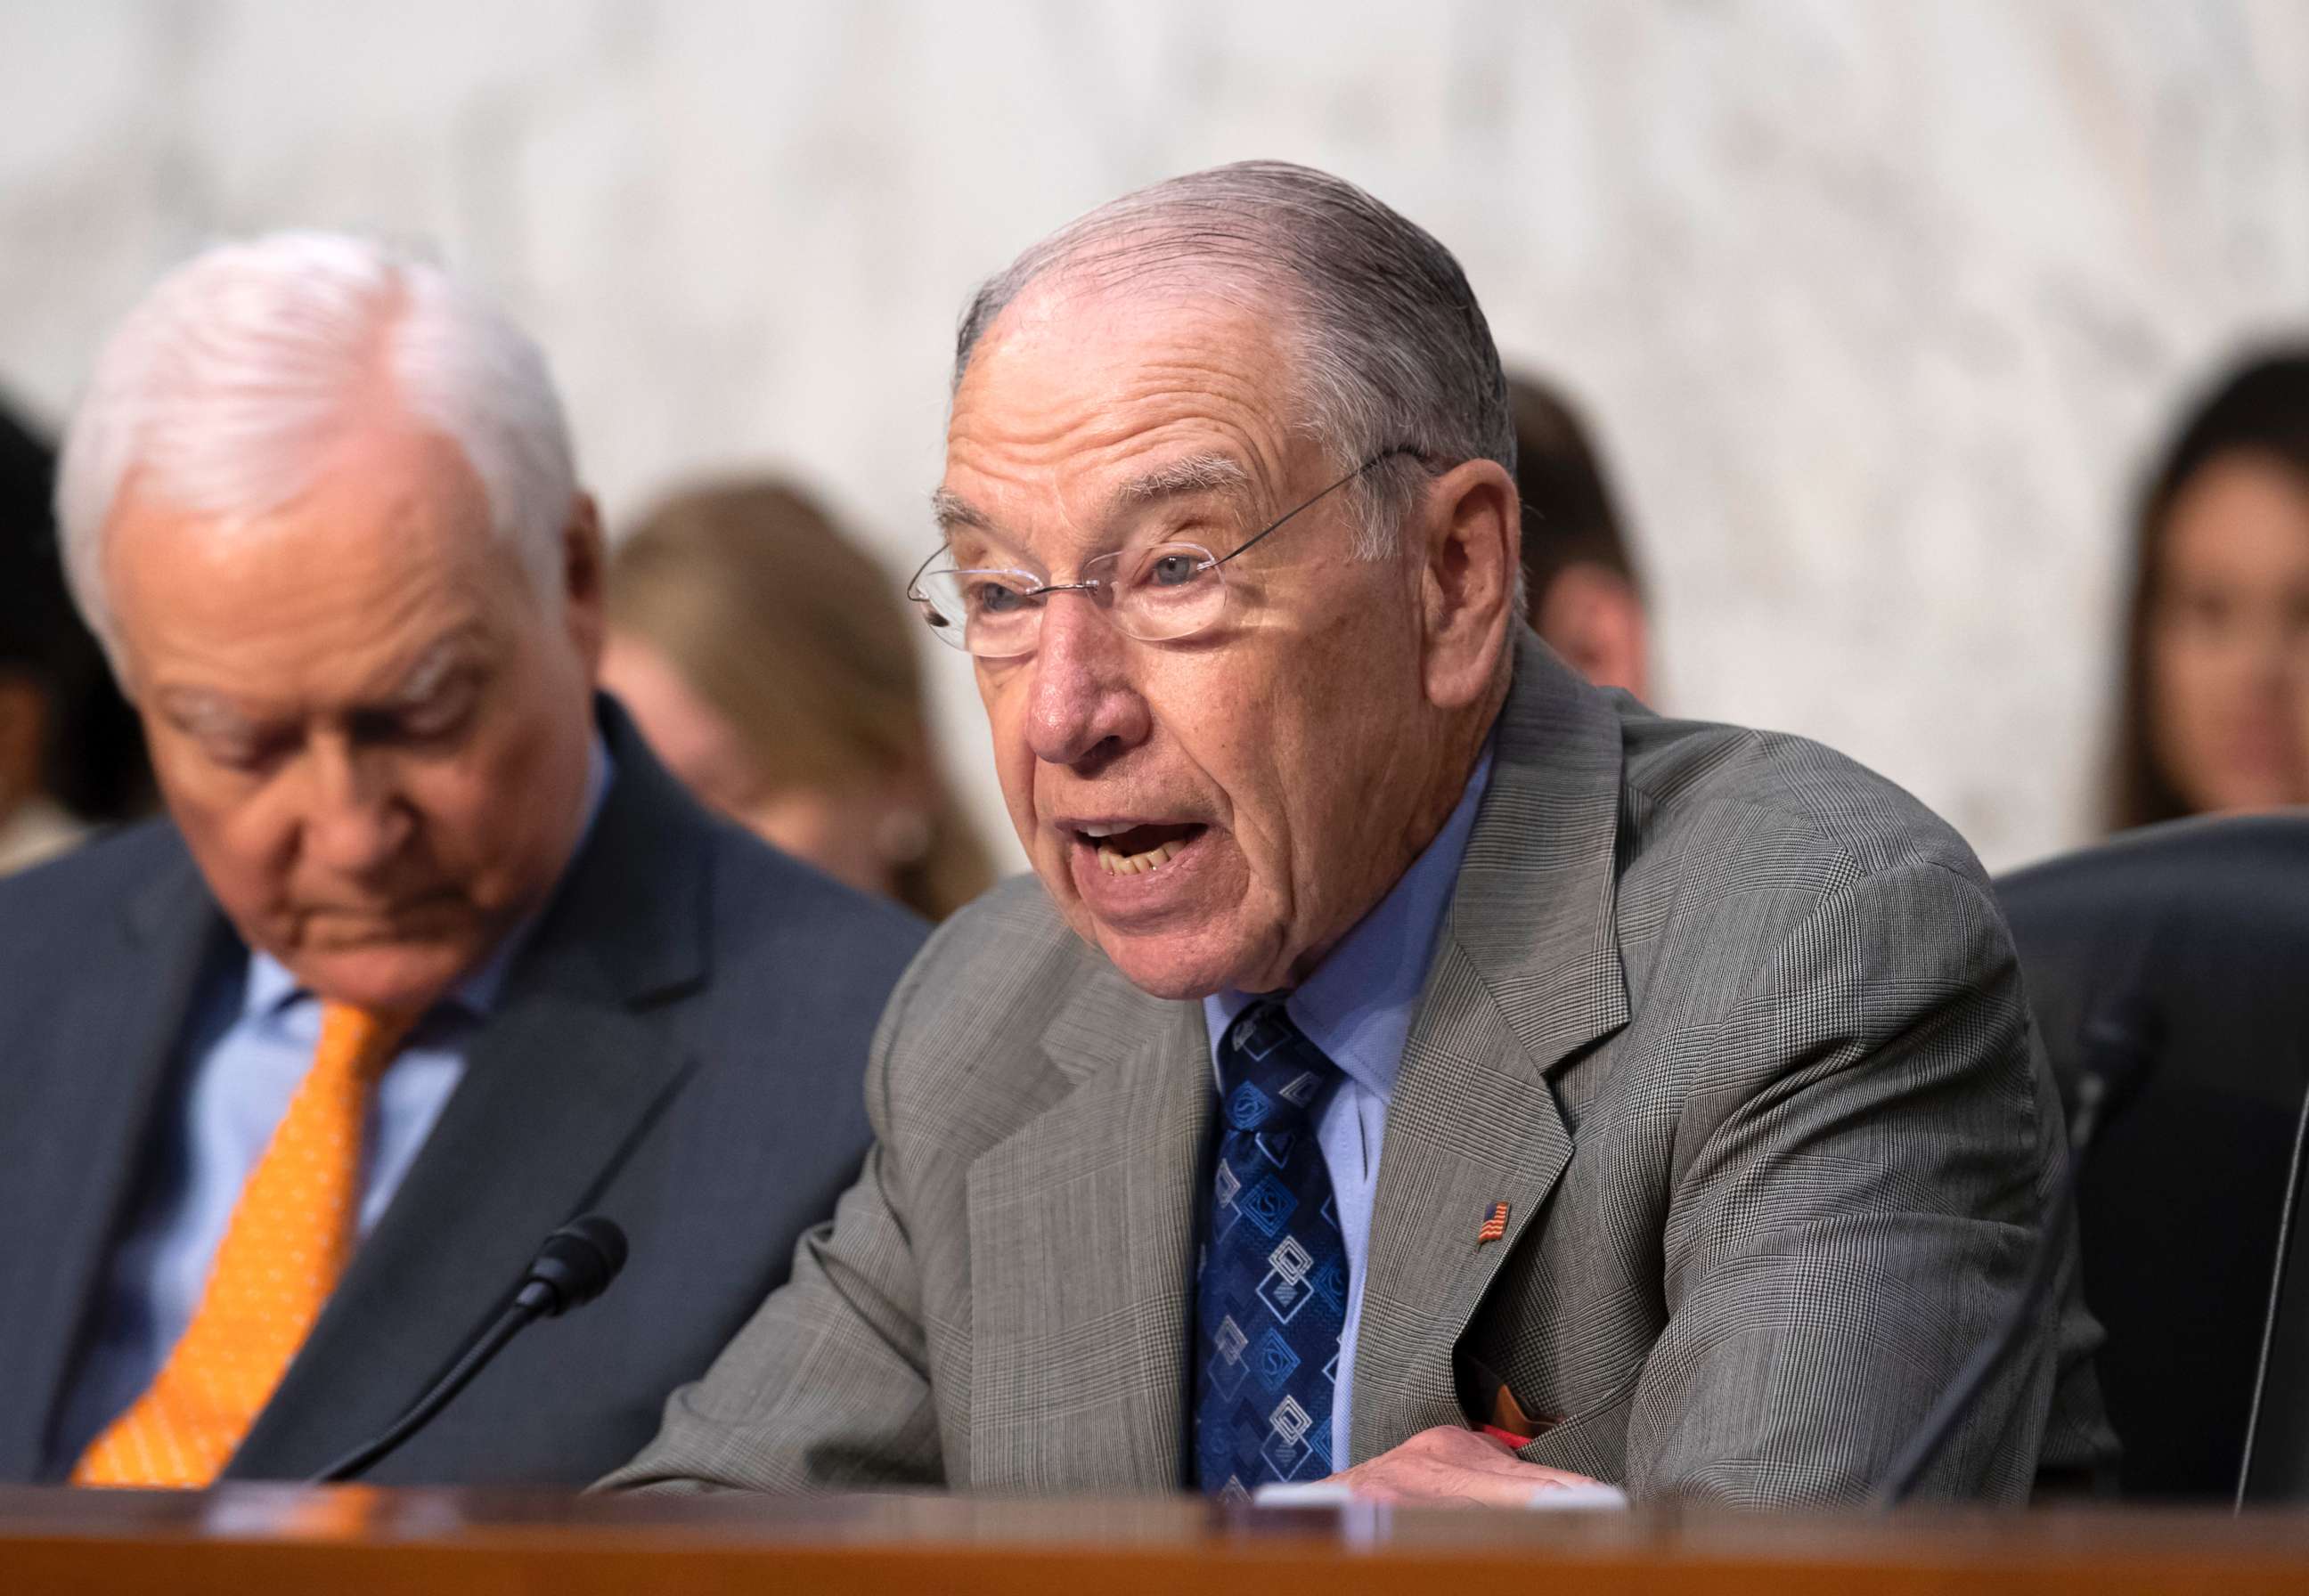 PHOTO: Senate Judiciary Committee Chairman Chuck Grassley, joined by Sen. Orrin Hatch, left, opens a hearing on the Trump administration's policies on immigration enforcement and family reunification efforts, on Capitol Hill in Washington, July 31, 2018.